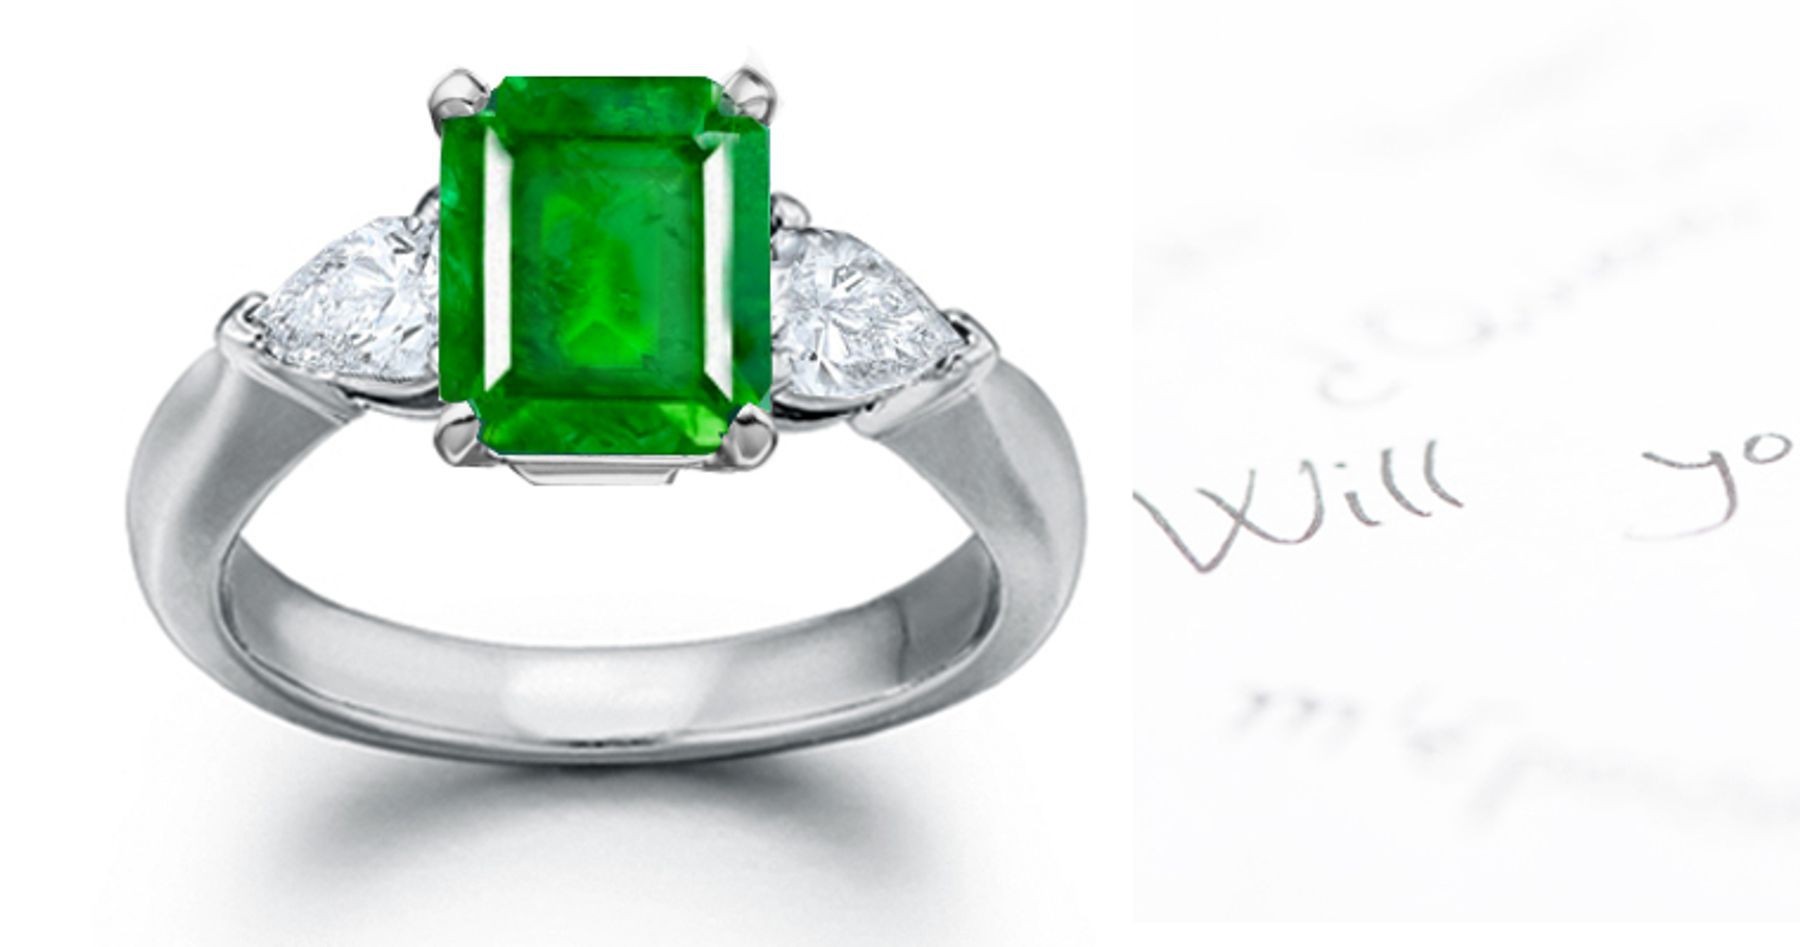 Arious Combinations: A long & Thin Elegant 3 Stone Emerald Cut inEmerald & Pear Shape Diamond Ring in Gold